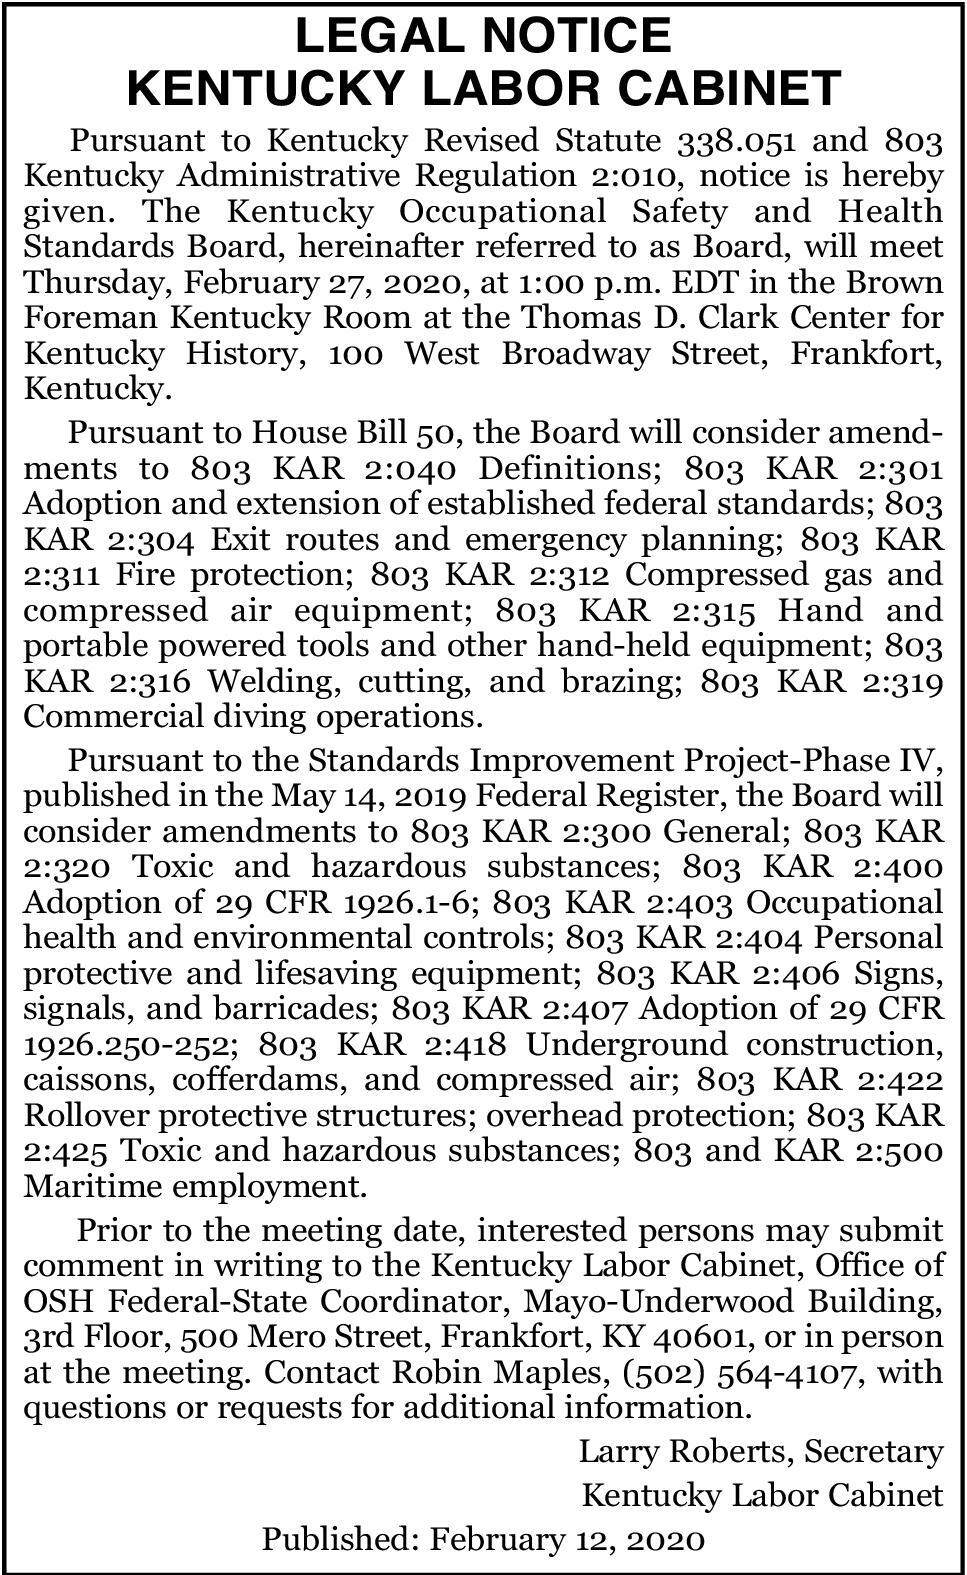 The Morehead News Newspaper Ads Classifieds Announcements